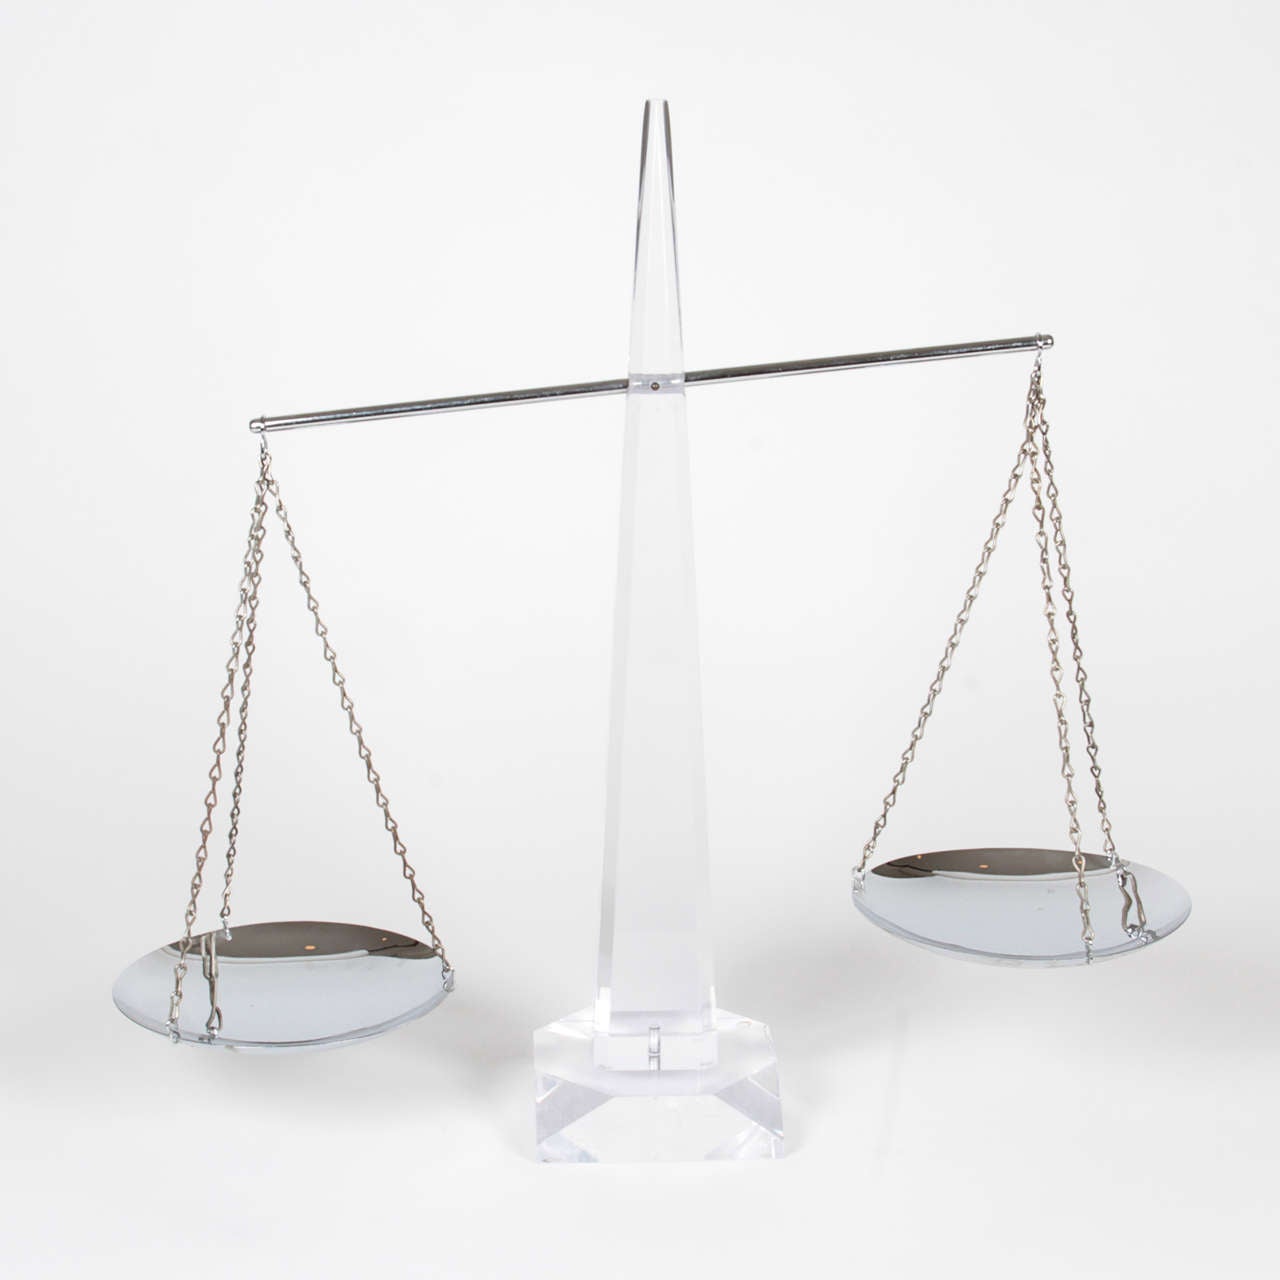 Vintage Lucite Balance Scale is very dramatic in size. This item is functional and beautiful. Perfect for any library or desktop.